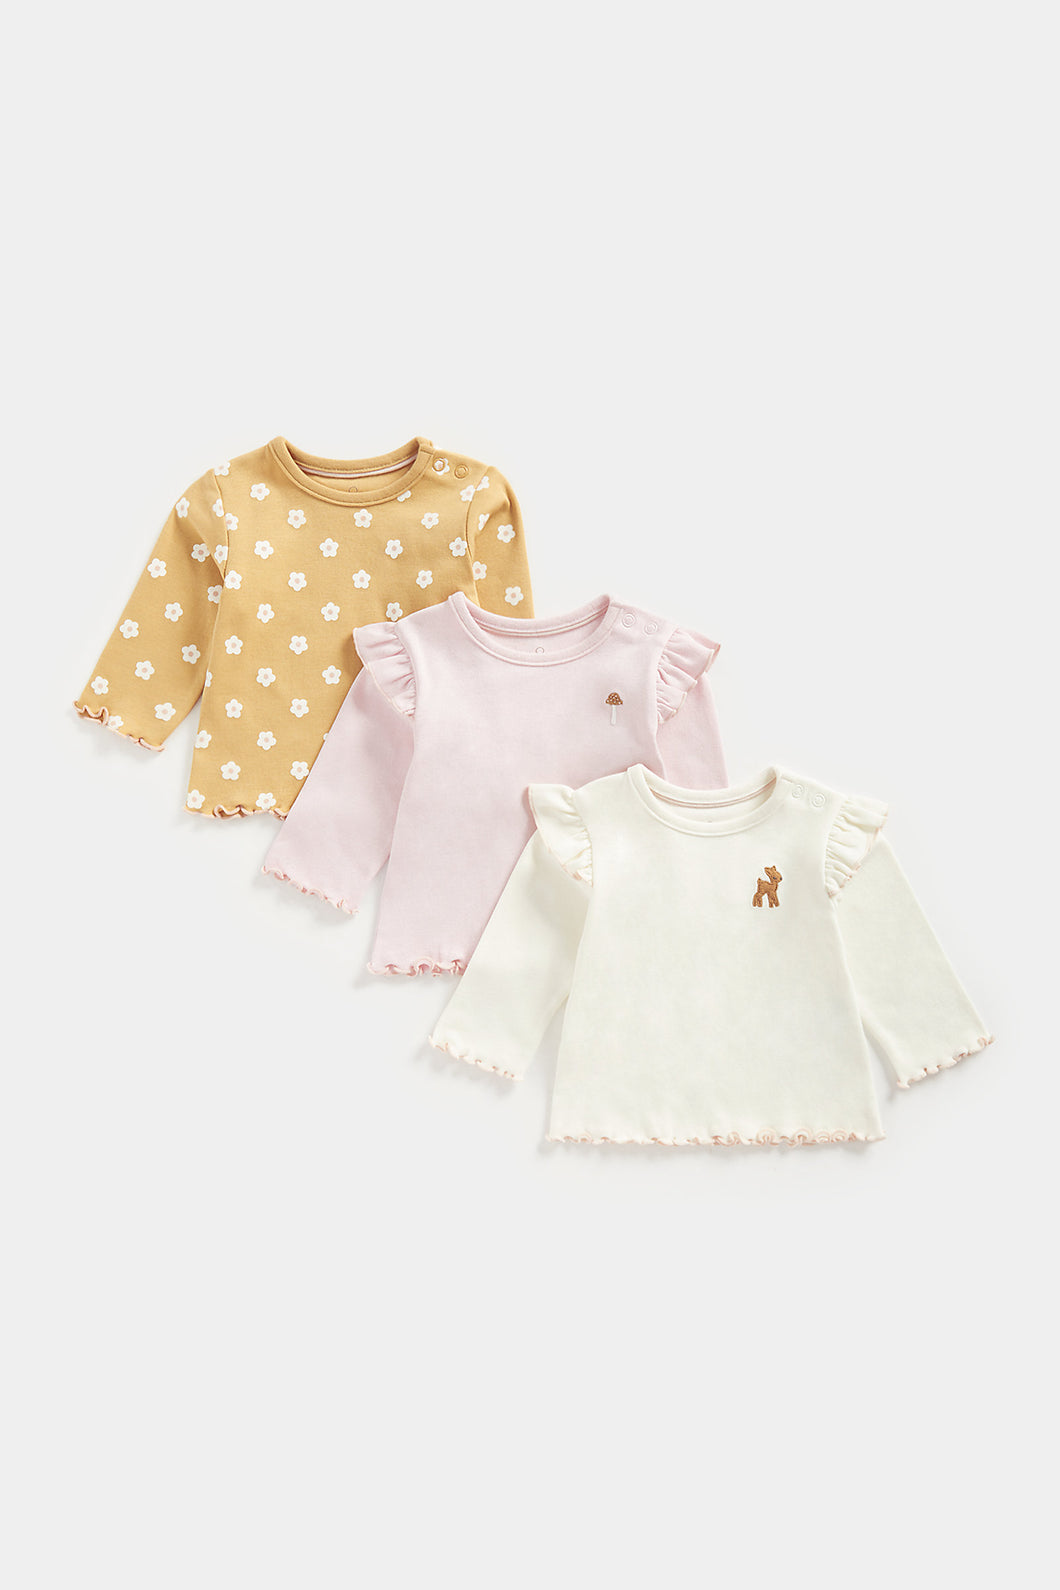 Mothercare Frilled T-Shirts - 3 Pack